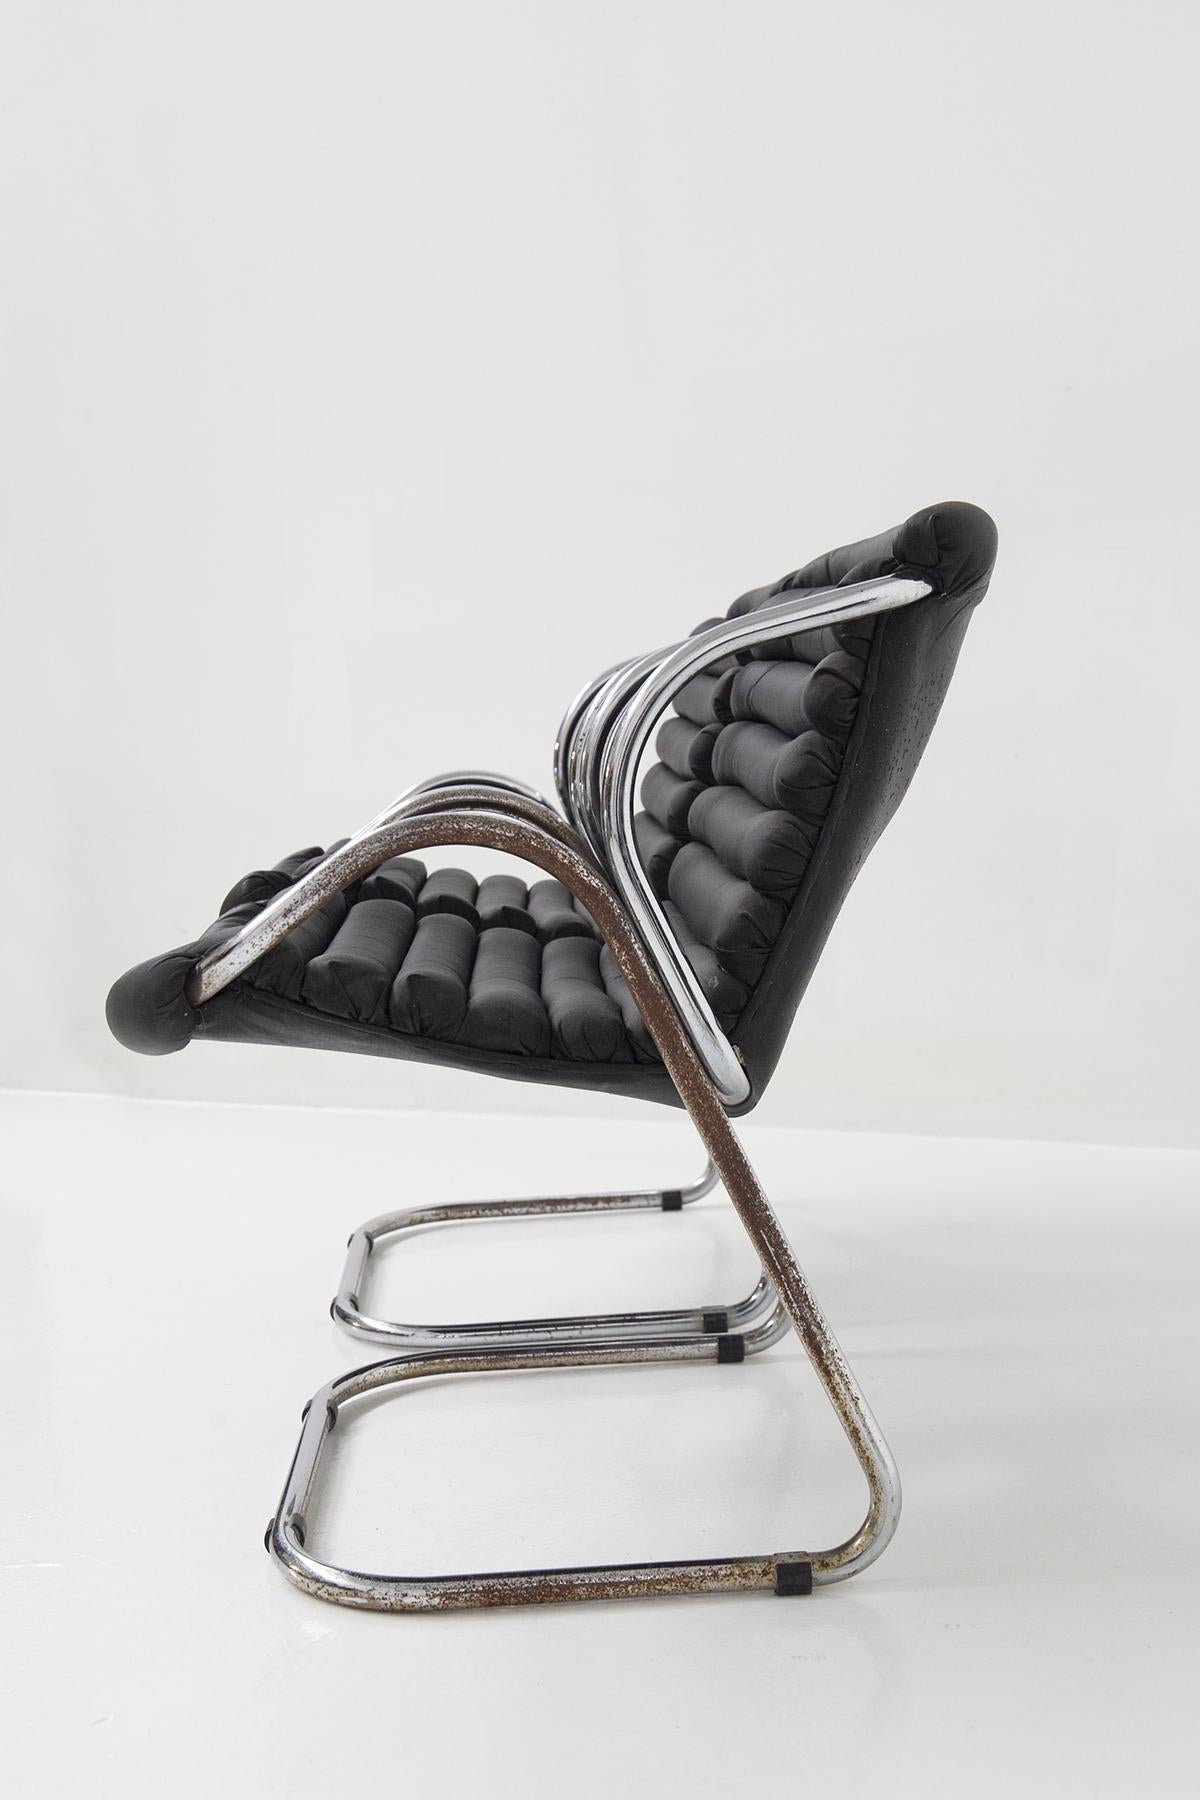 Mid-20th Century Whimsical Mid-Century Chairs in Black Leather For Sale